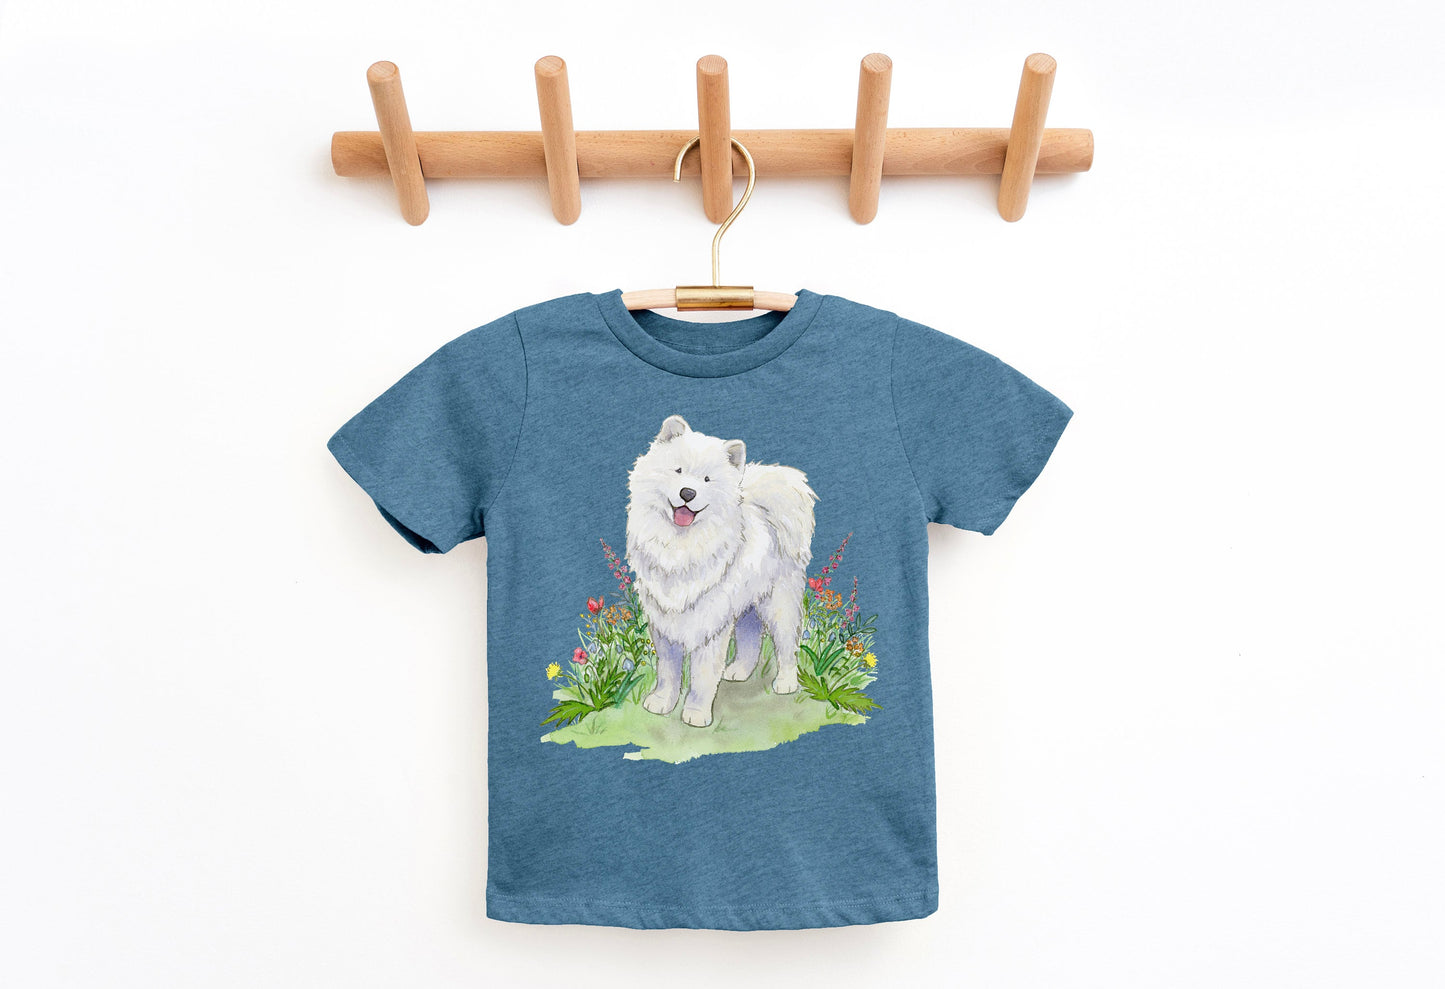 Teal toddler tee shirt with white samoyed dog and flowers on it.